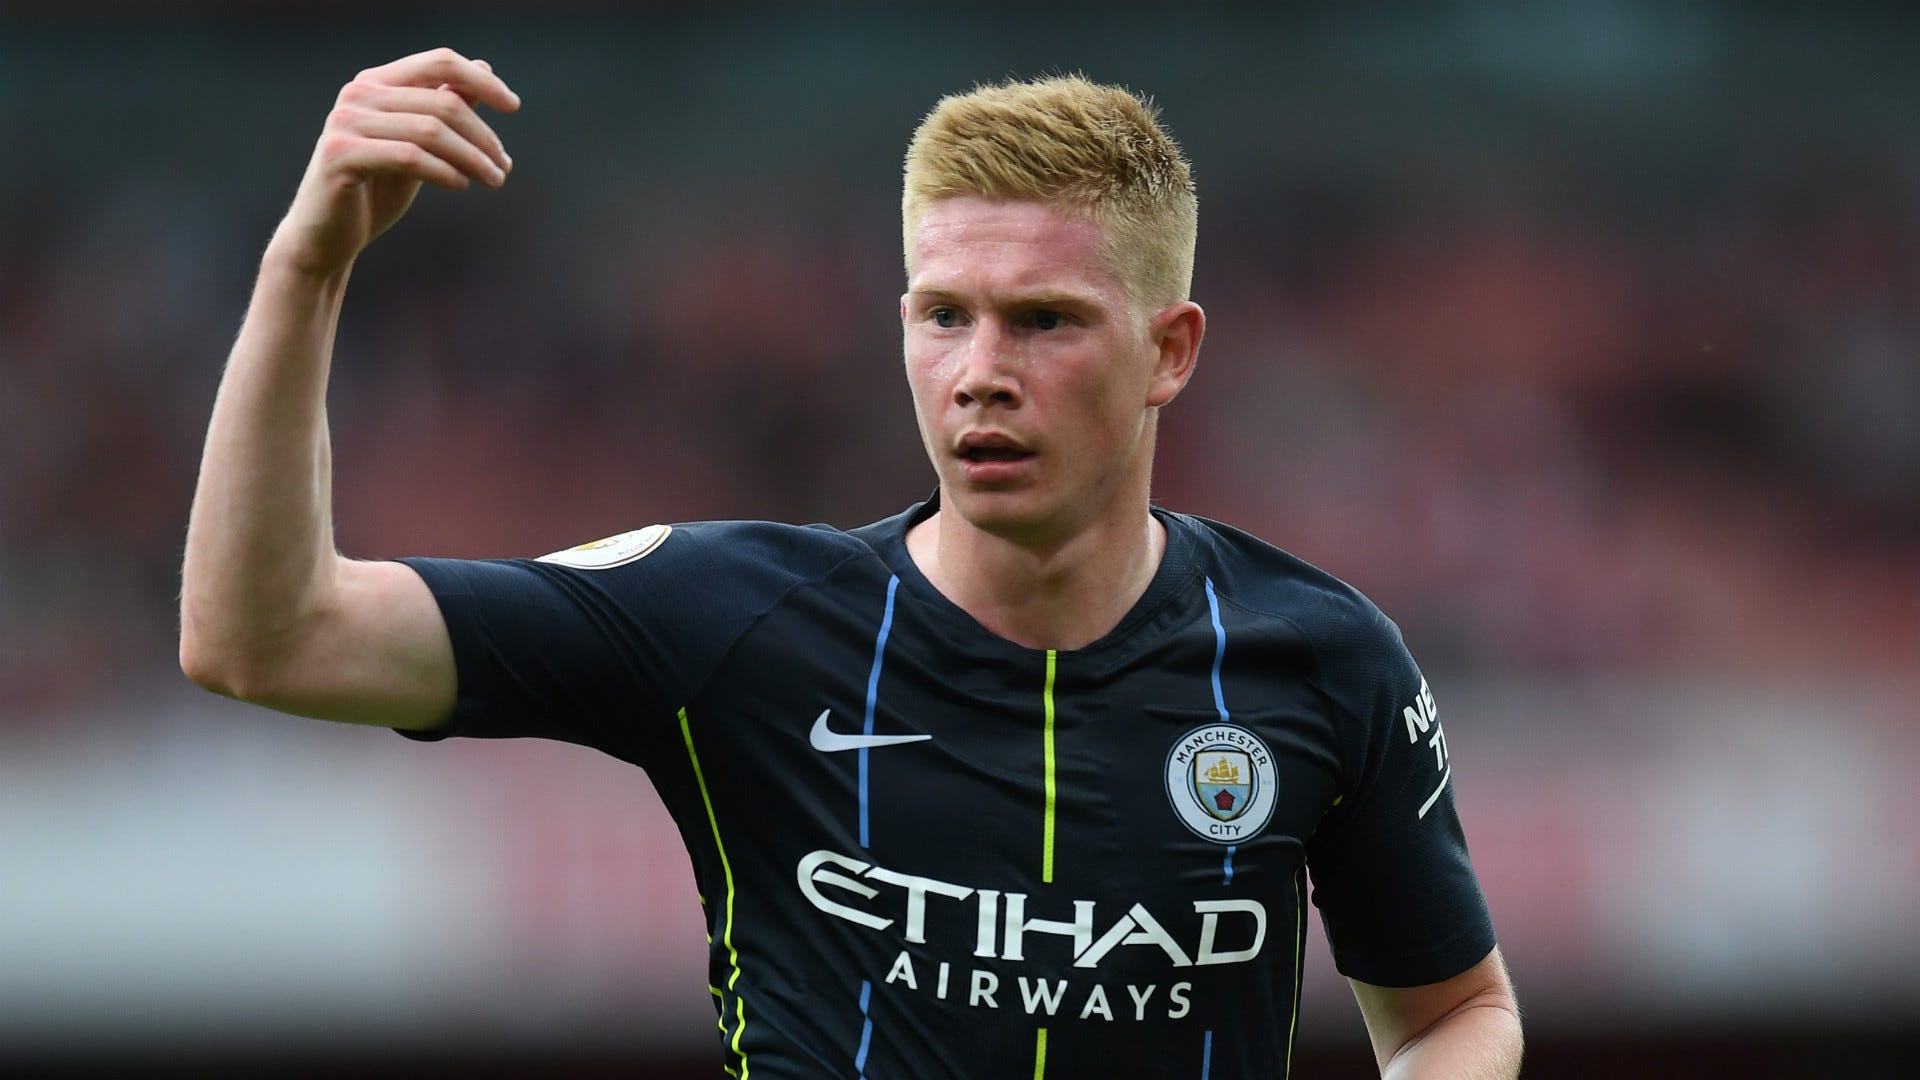 De Bruyne becomes the first Man City player to beat Ronaldo and Messi on Ballon d'Or awards